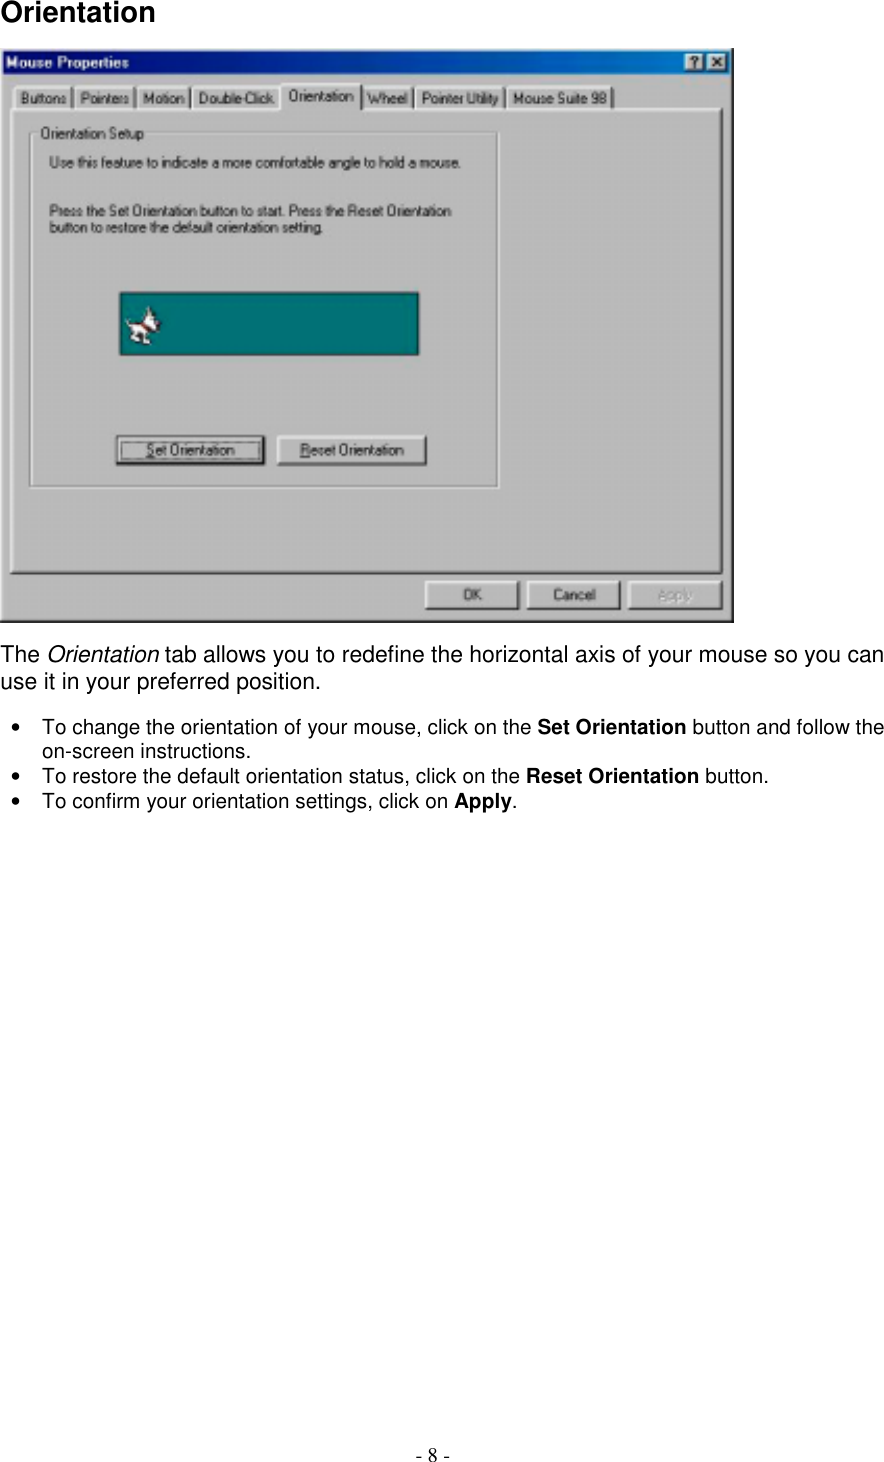 - 8 -OrientationThe Orientation tab allows you to redefine the horizontal axis of your mouse so you canuse it in your preferred position.•  To change the orientation of your mouse, click on the Set Orientation button and follow theon-screen instructions.•  To restore the default orientation status, click on the Reset Orientation button.•  To confirm your orientation settings, click on Apply.